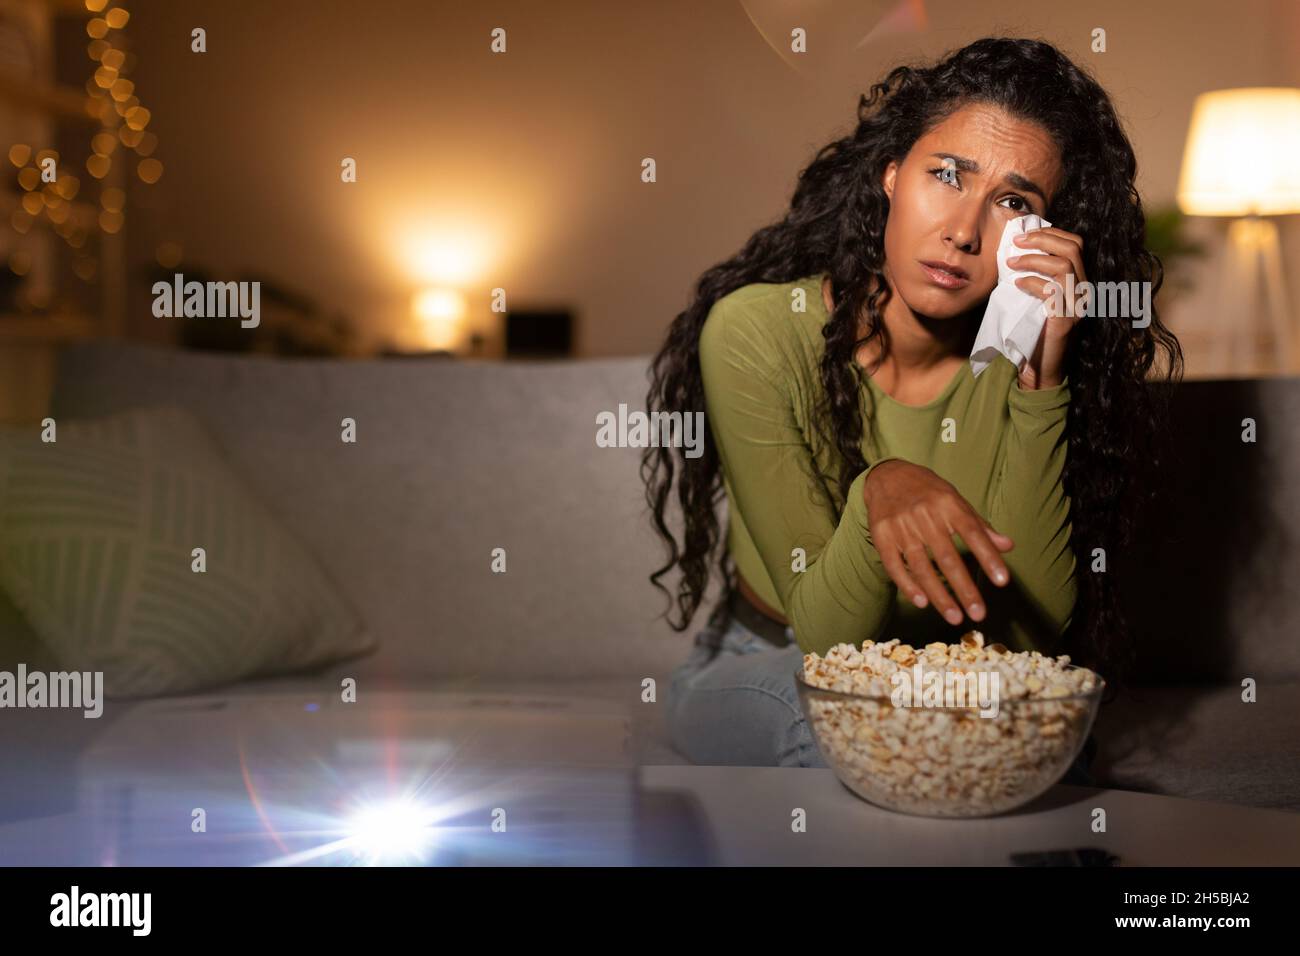 Depressed Woman Crying Watching Sad Movie Wiping Tears At Home Stock Photo